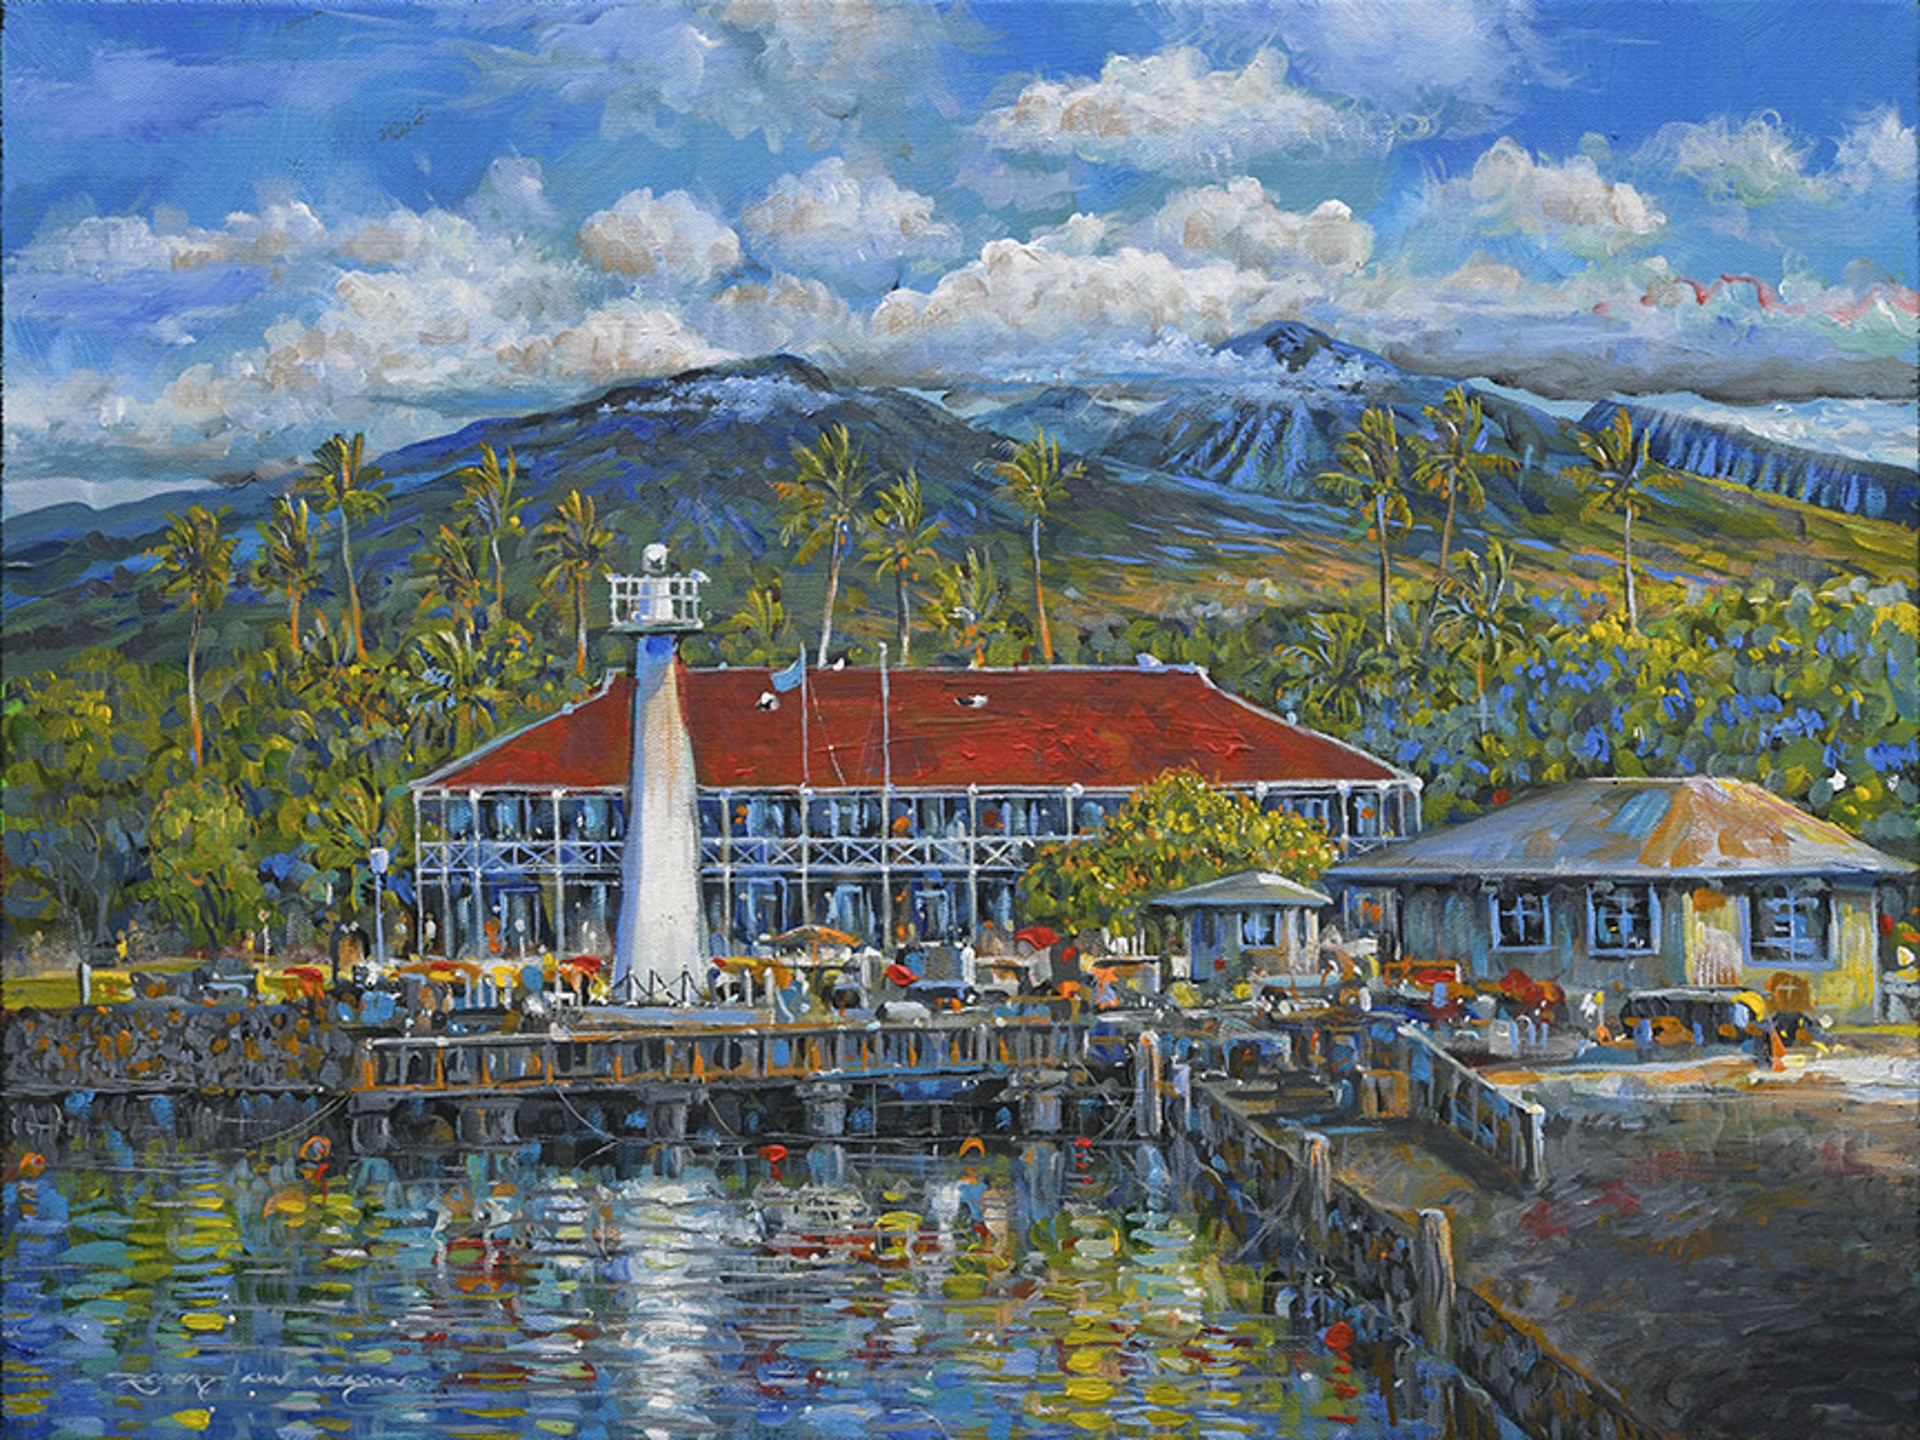 Lahaina Remembered by Robert Lyn Nelson